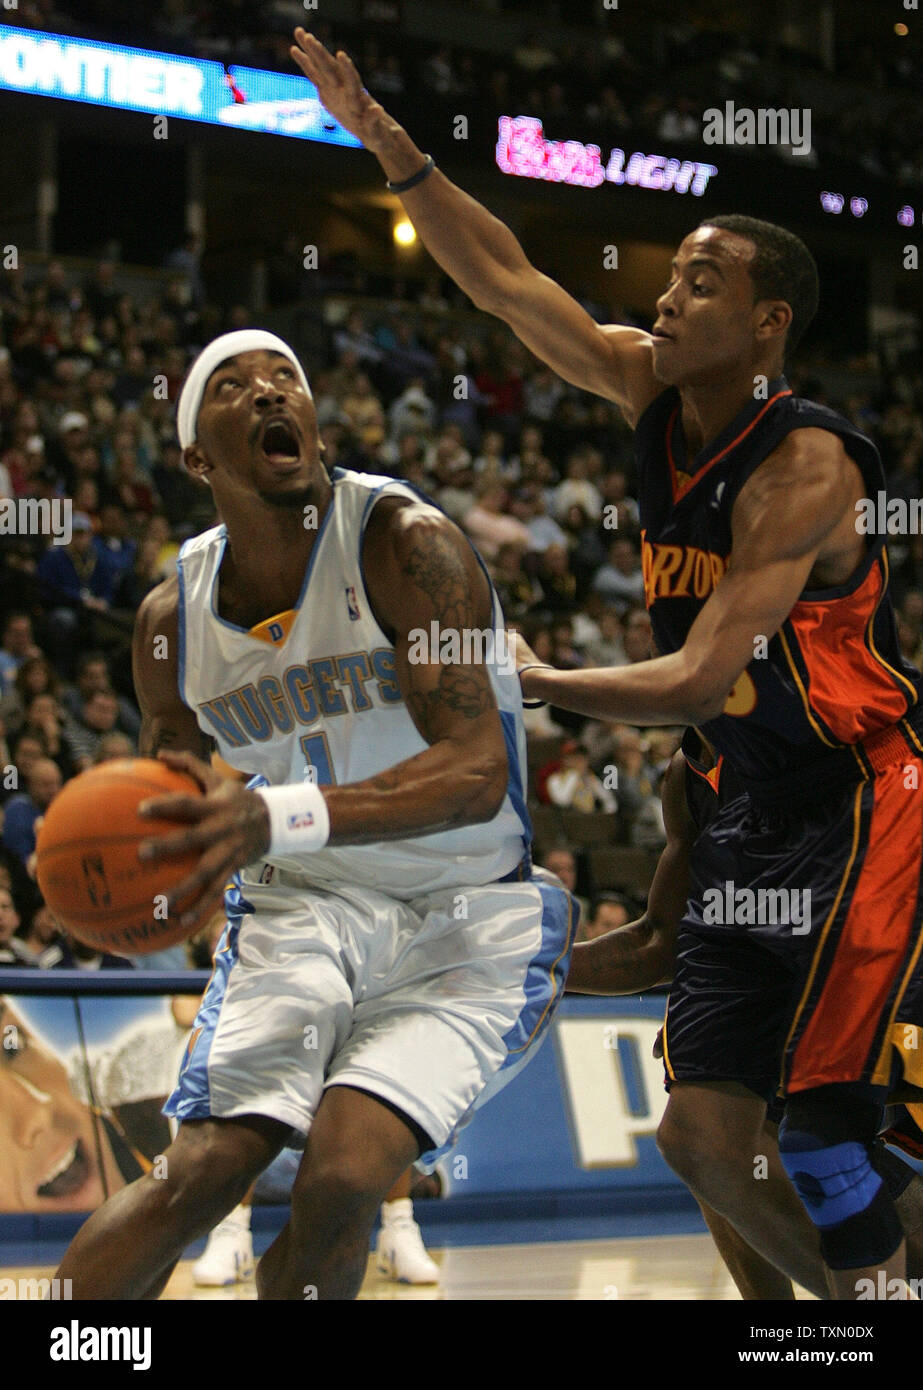 Denver Nuggets J.R. Smith (L) looks to score against Golden State Warriors Monta Ellis (R) during the first half of the game at the Pepsi Center in Denver on November 24, 2006.  Smith scored 31 points leading the Nuggets to a 140-129 win over the Warriors.  (UPI Photo/Gary C. Caskey) Stock Photo